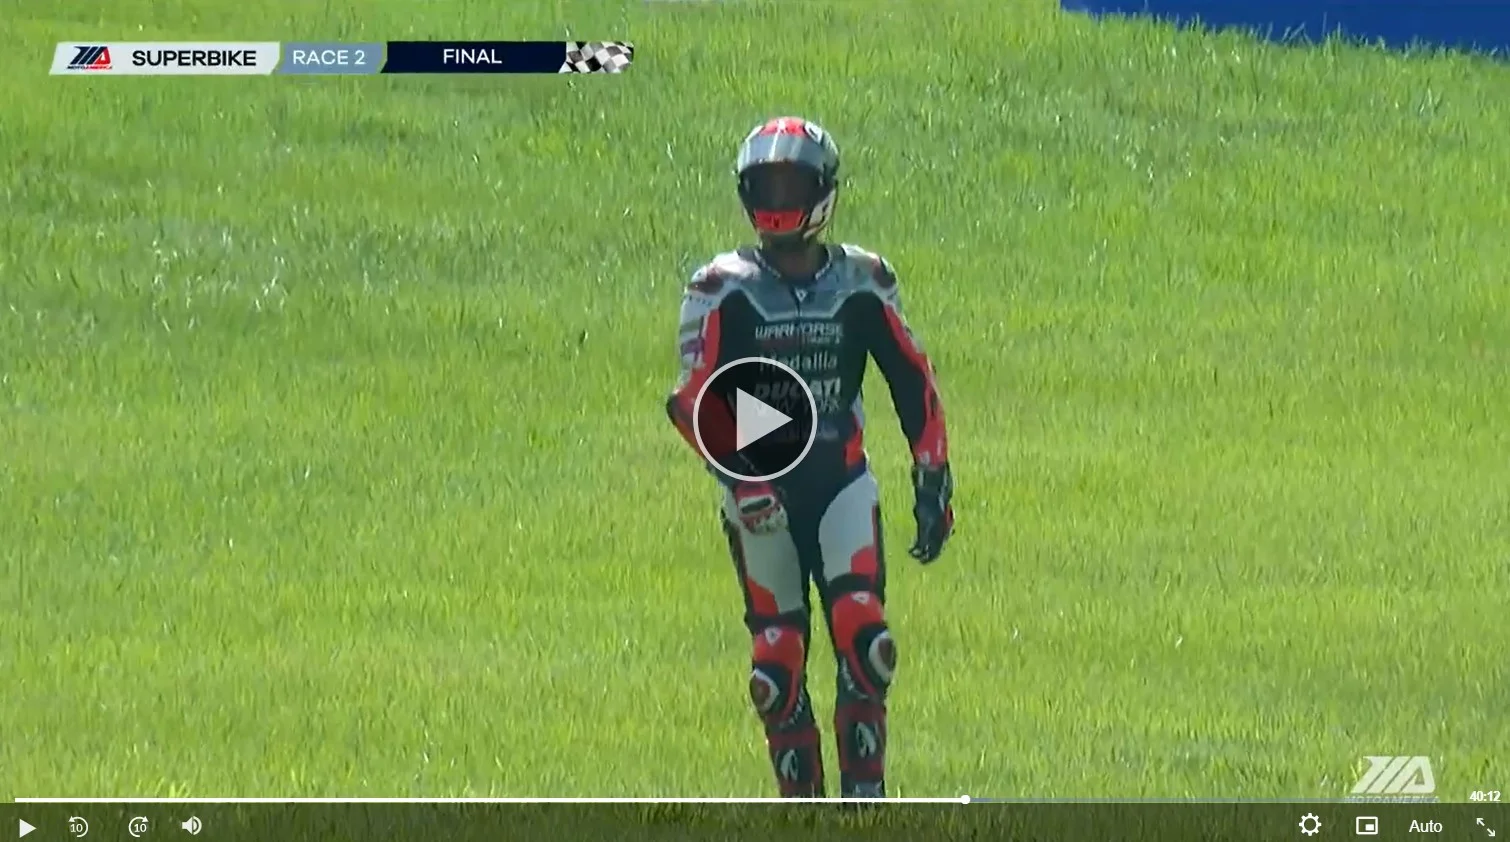 Danilo Petrucci standing less than 56 seconds after he crashed at the end of MotoAmerica Medallia Superbike Race Two at VIR